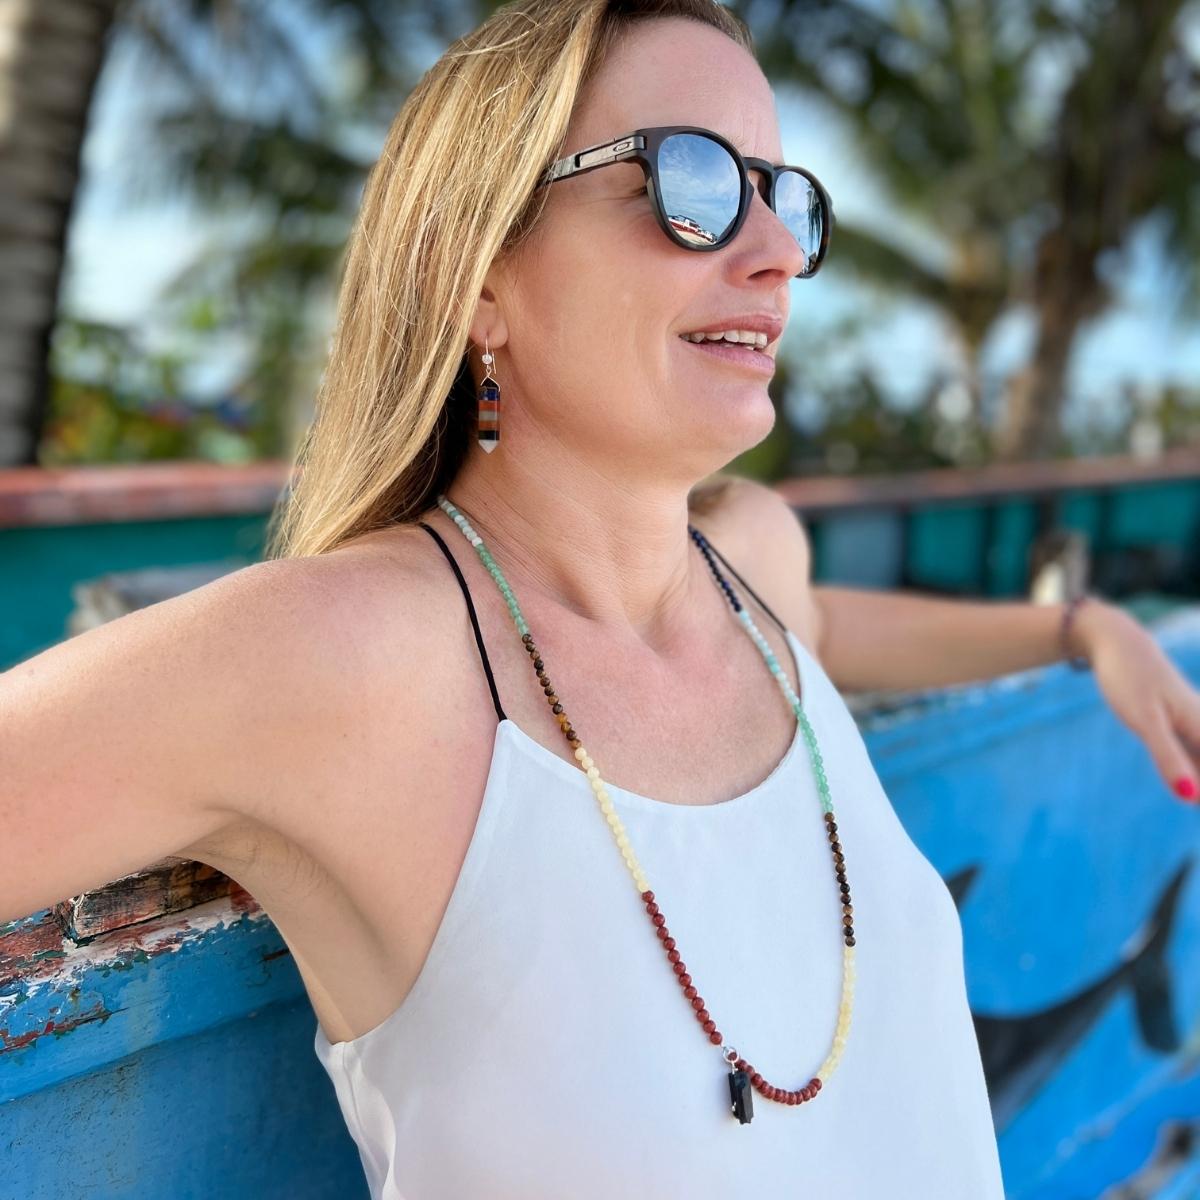 Get the Flowing Energy Chakra Necklace, Wrap Bracelet  and Earring Set with healing gemstones and feel the balance and harmony of your chakras. This beautiful jewelry set features gemstones for each chakra, promoting healing and positive energy. Order now and enjoy its benefits! 